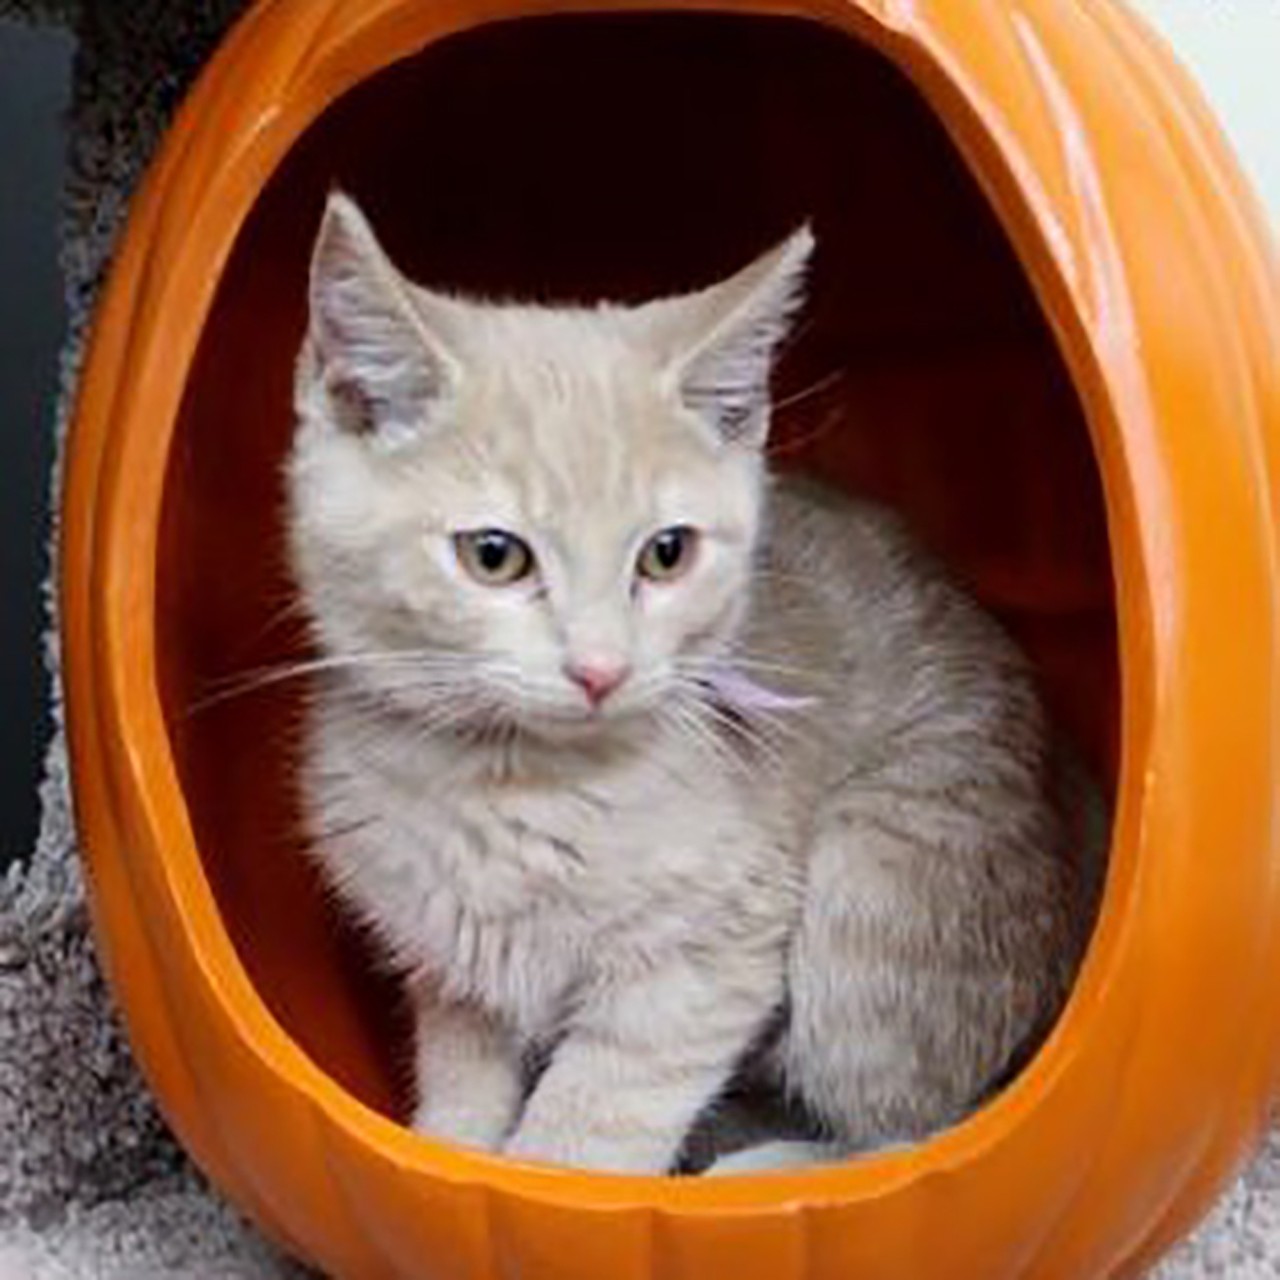 Candy Corn
Age: 4 months old | Breed: Domestic Short Hair/Mix | Sex: Male | Rescue: SAAP 
Photo via AdoptAStray.com